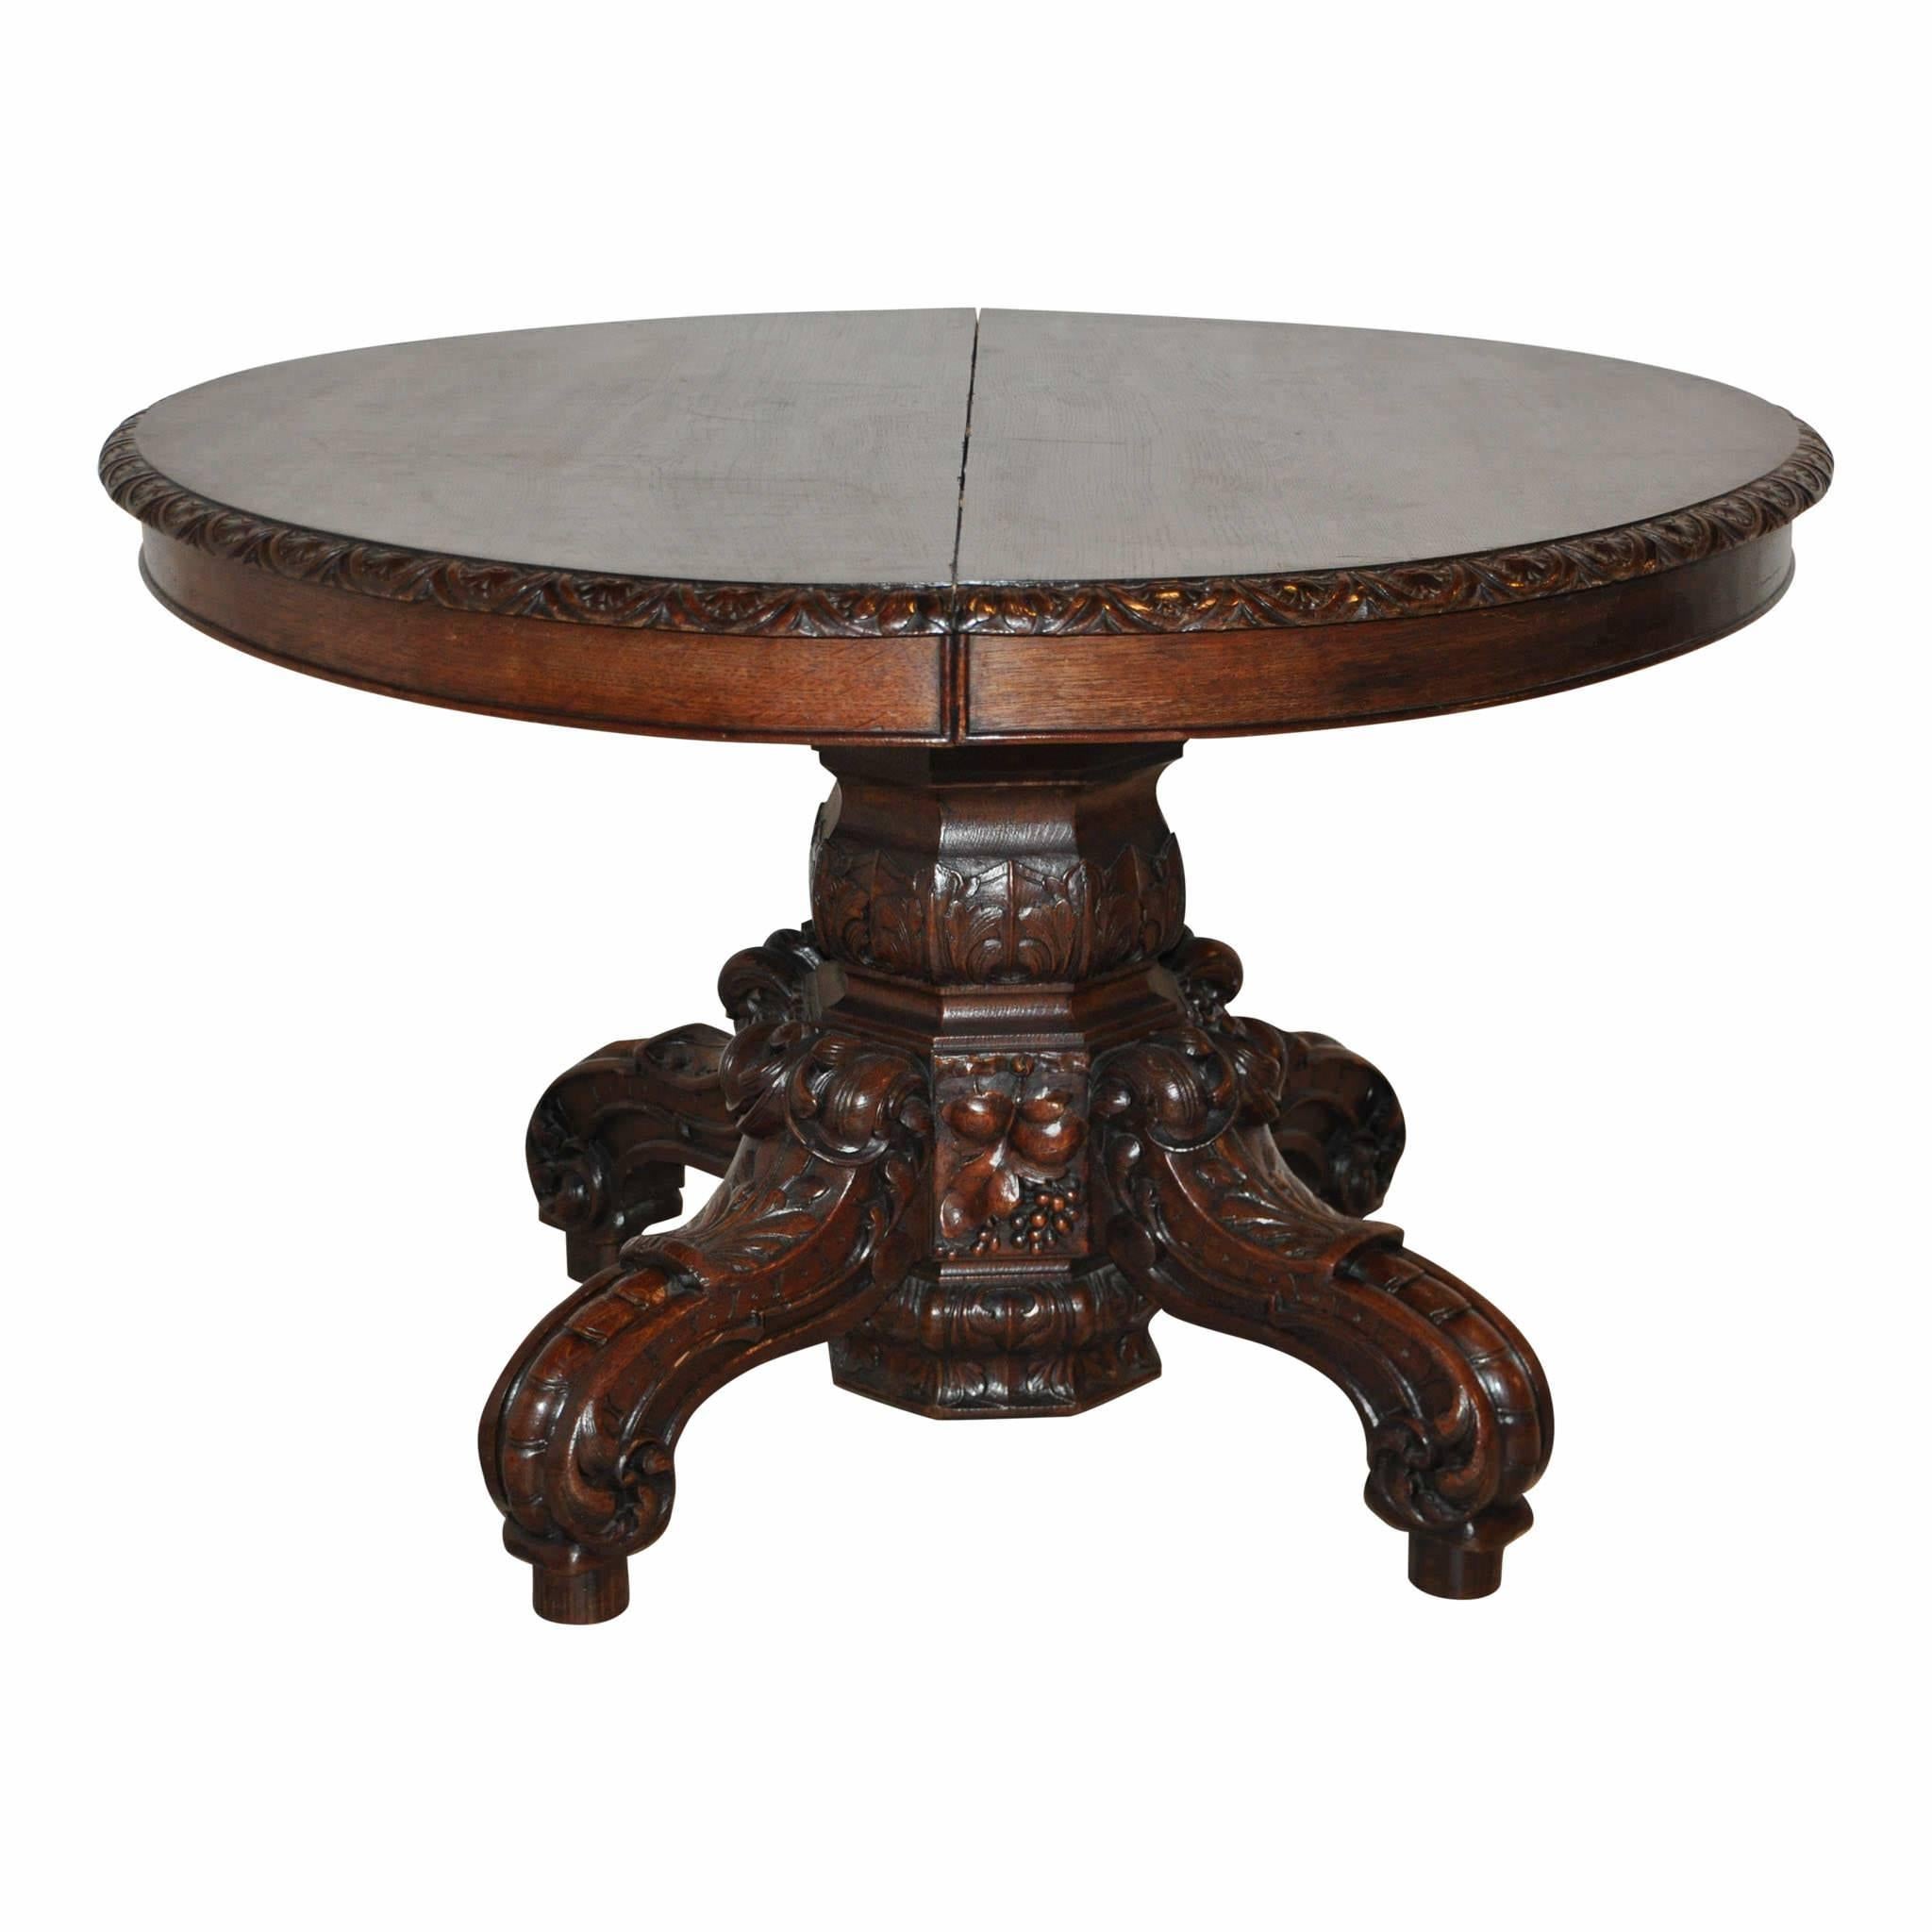 This table is a rare find! It is uncommon to acquire a hunt table with a finished, matching leaf like this one. Most hunt tables are able to expand but the leaves are missing or made from unfinished slabs of wood. This table is supported by a large,